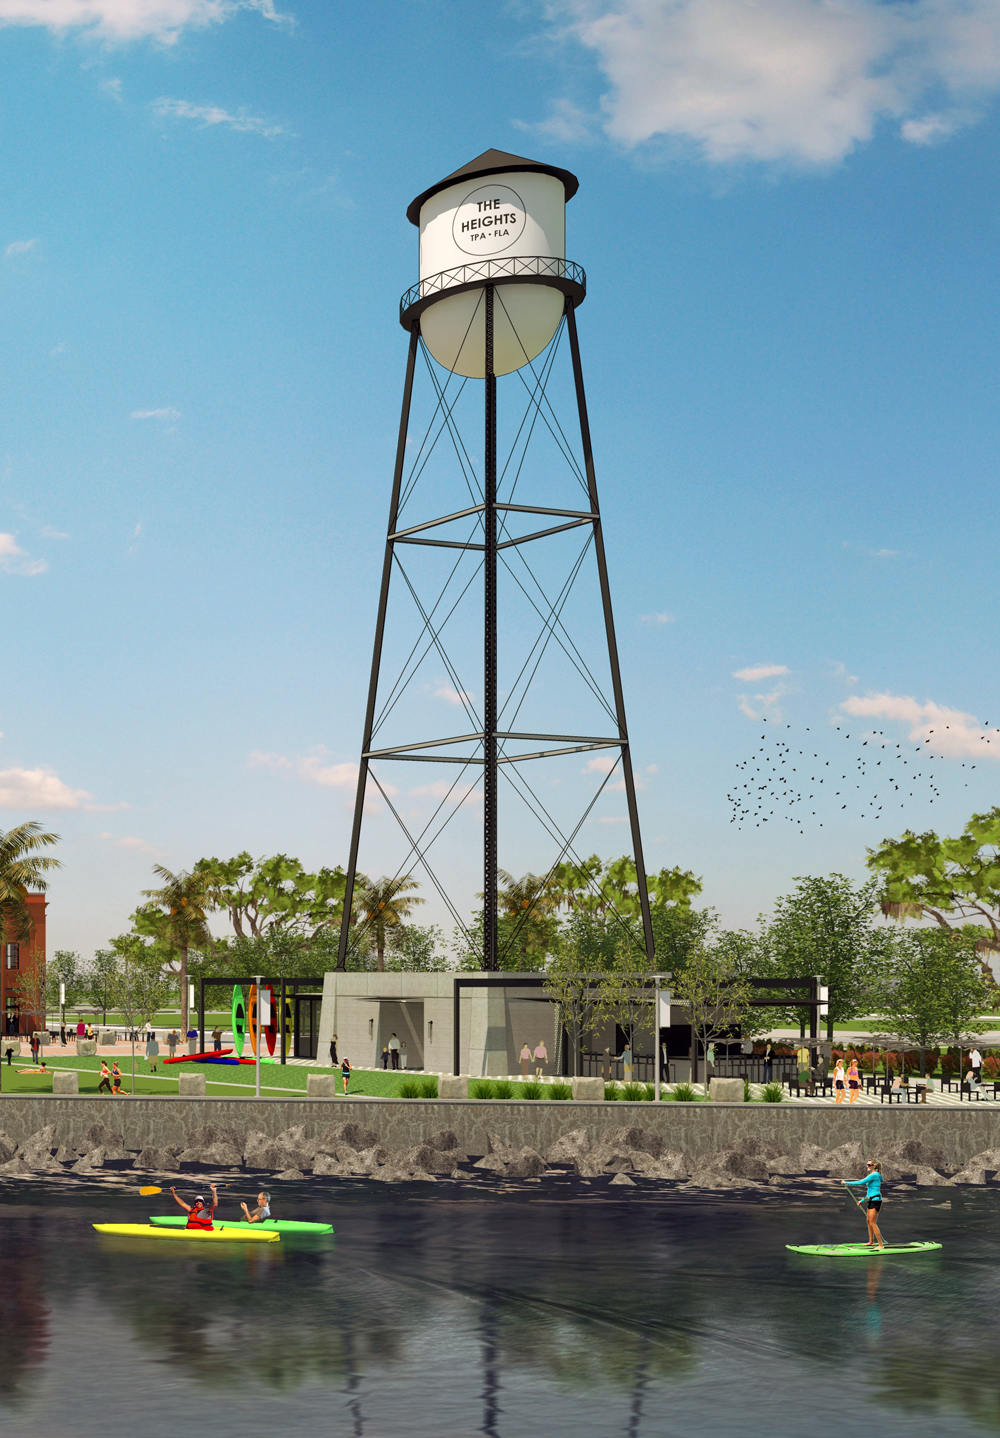 Atlantic Beer & Oyster will be an outdoor eatery located under a water tower along the Tampa Riverwalk in The Heights, which will open in the spring of 2017.